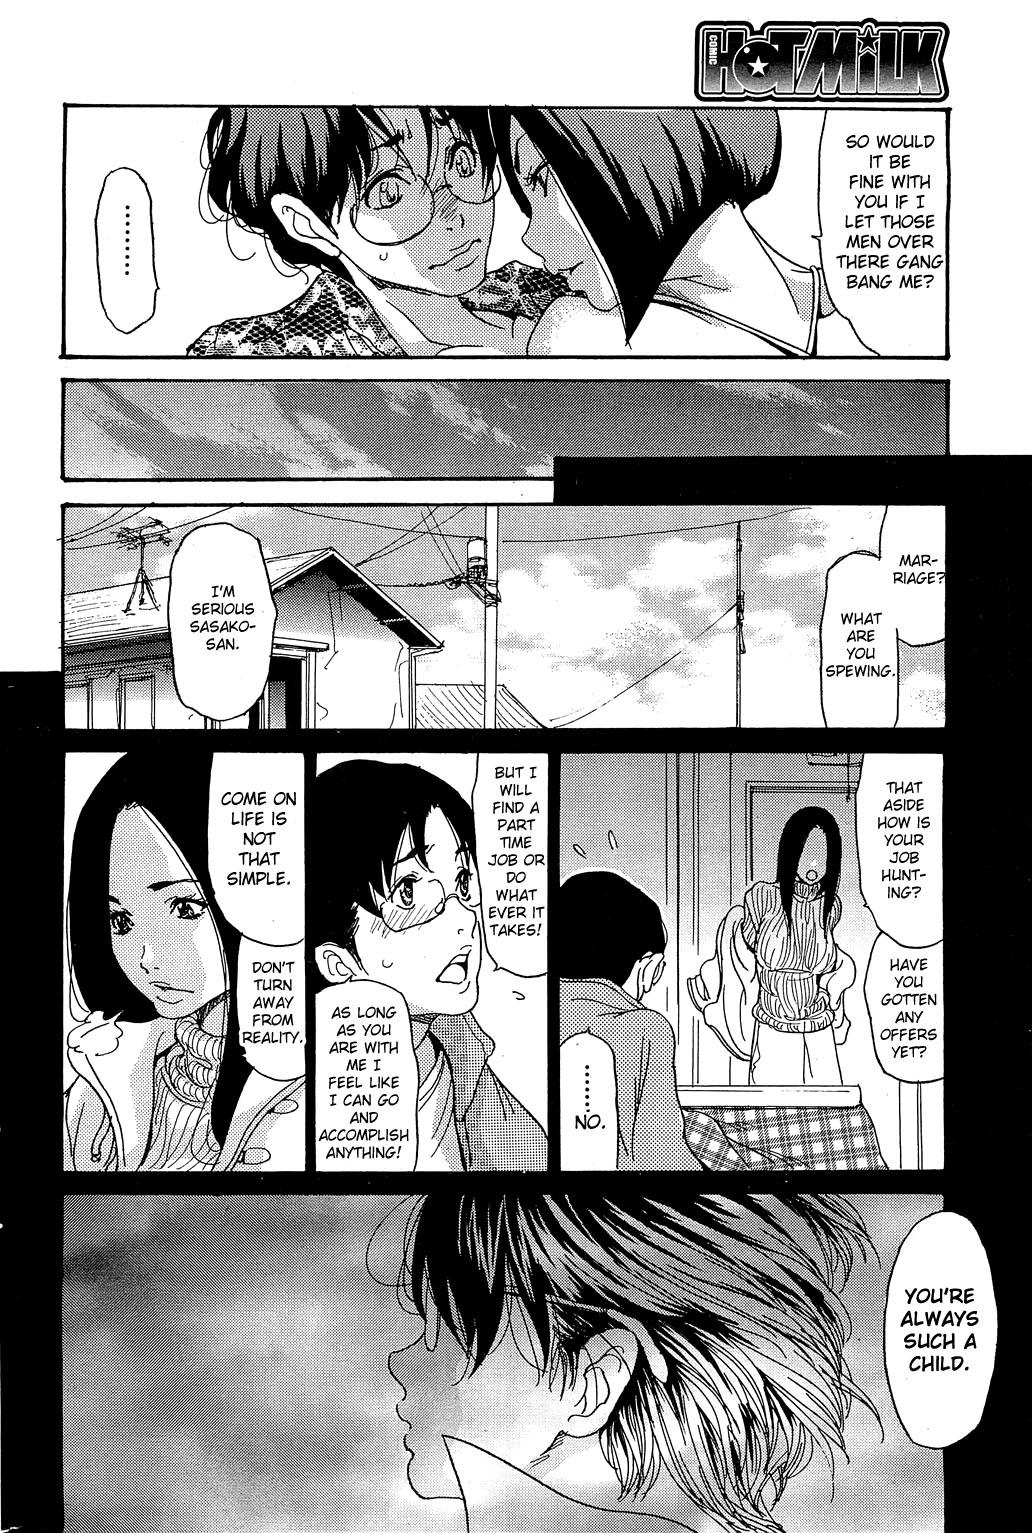 [Aoi Hitori] Umi no Yeah!! 2013 ~The Peaceful Married Couple's Hair Trigger Crisis~ Ch.1 [English][aceonetwo] 5